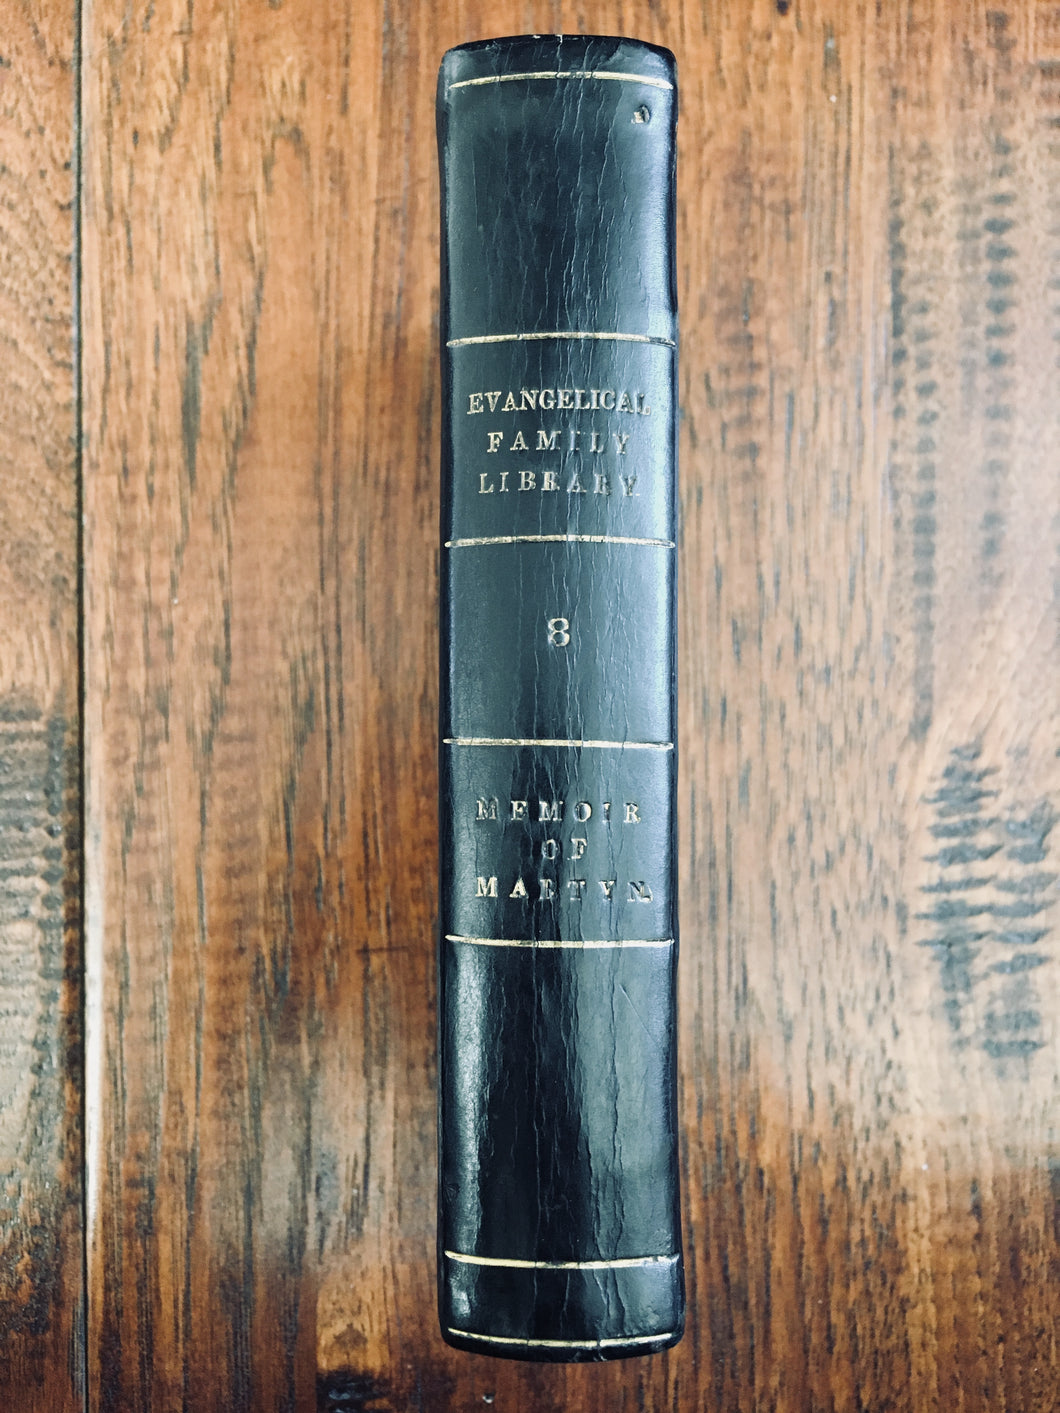 1830 HENRY MARTYN. Memoir of Pioneer Missionary to Persia and India.